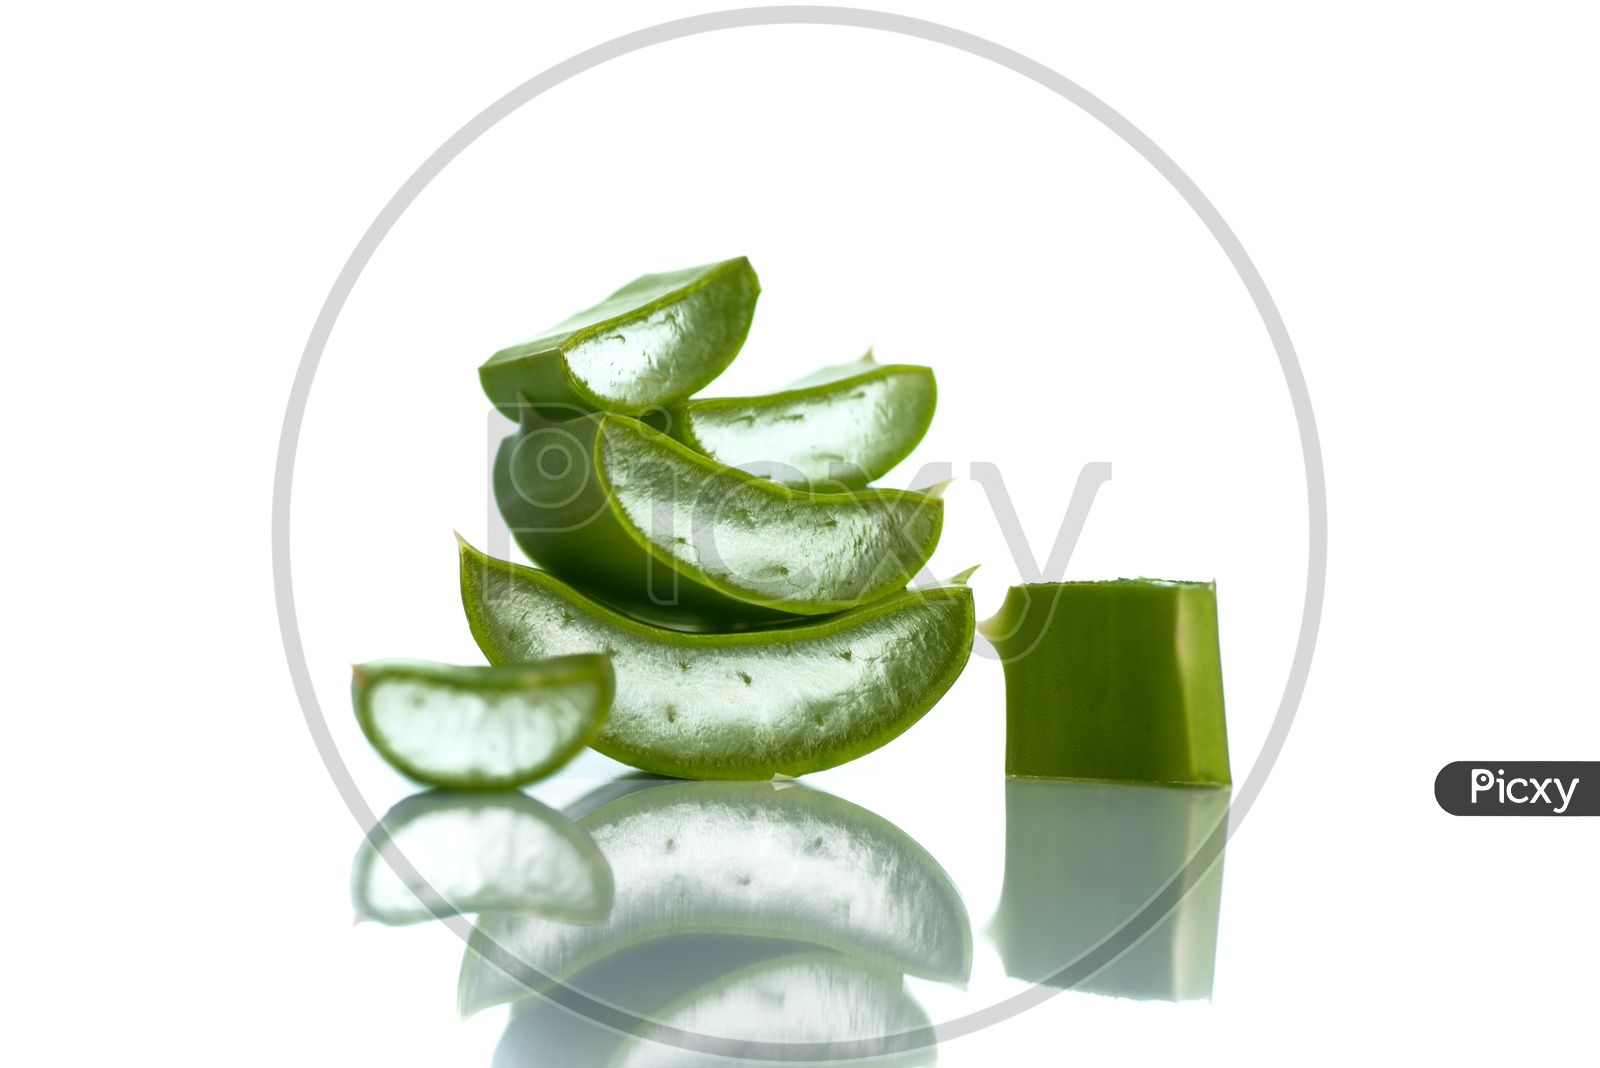 Sliced Aloe Vera Pieces On an Isolated White Background